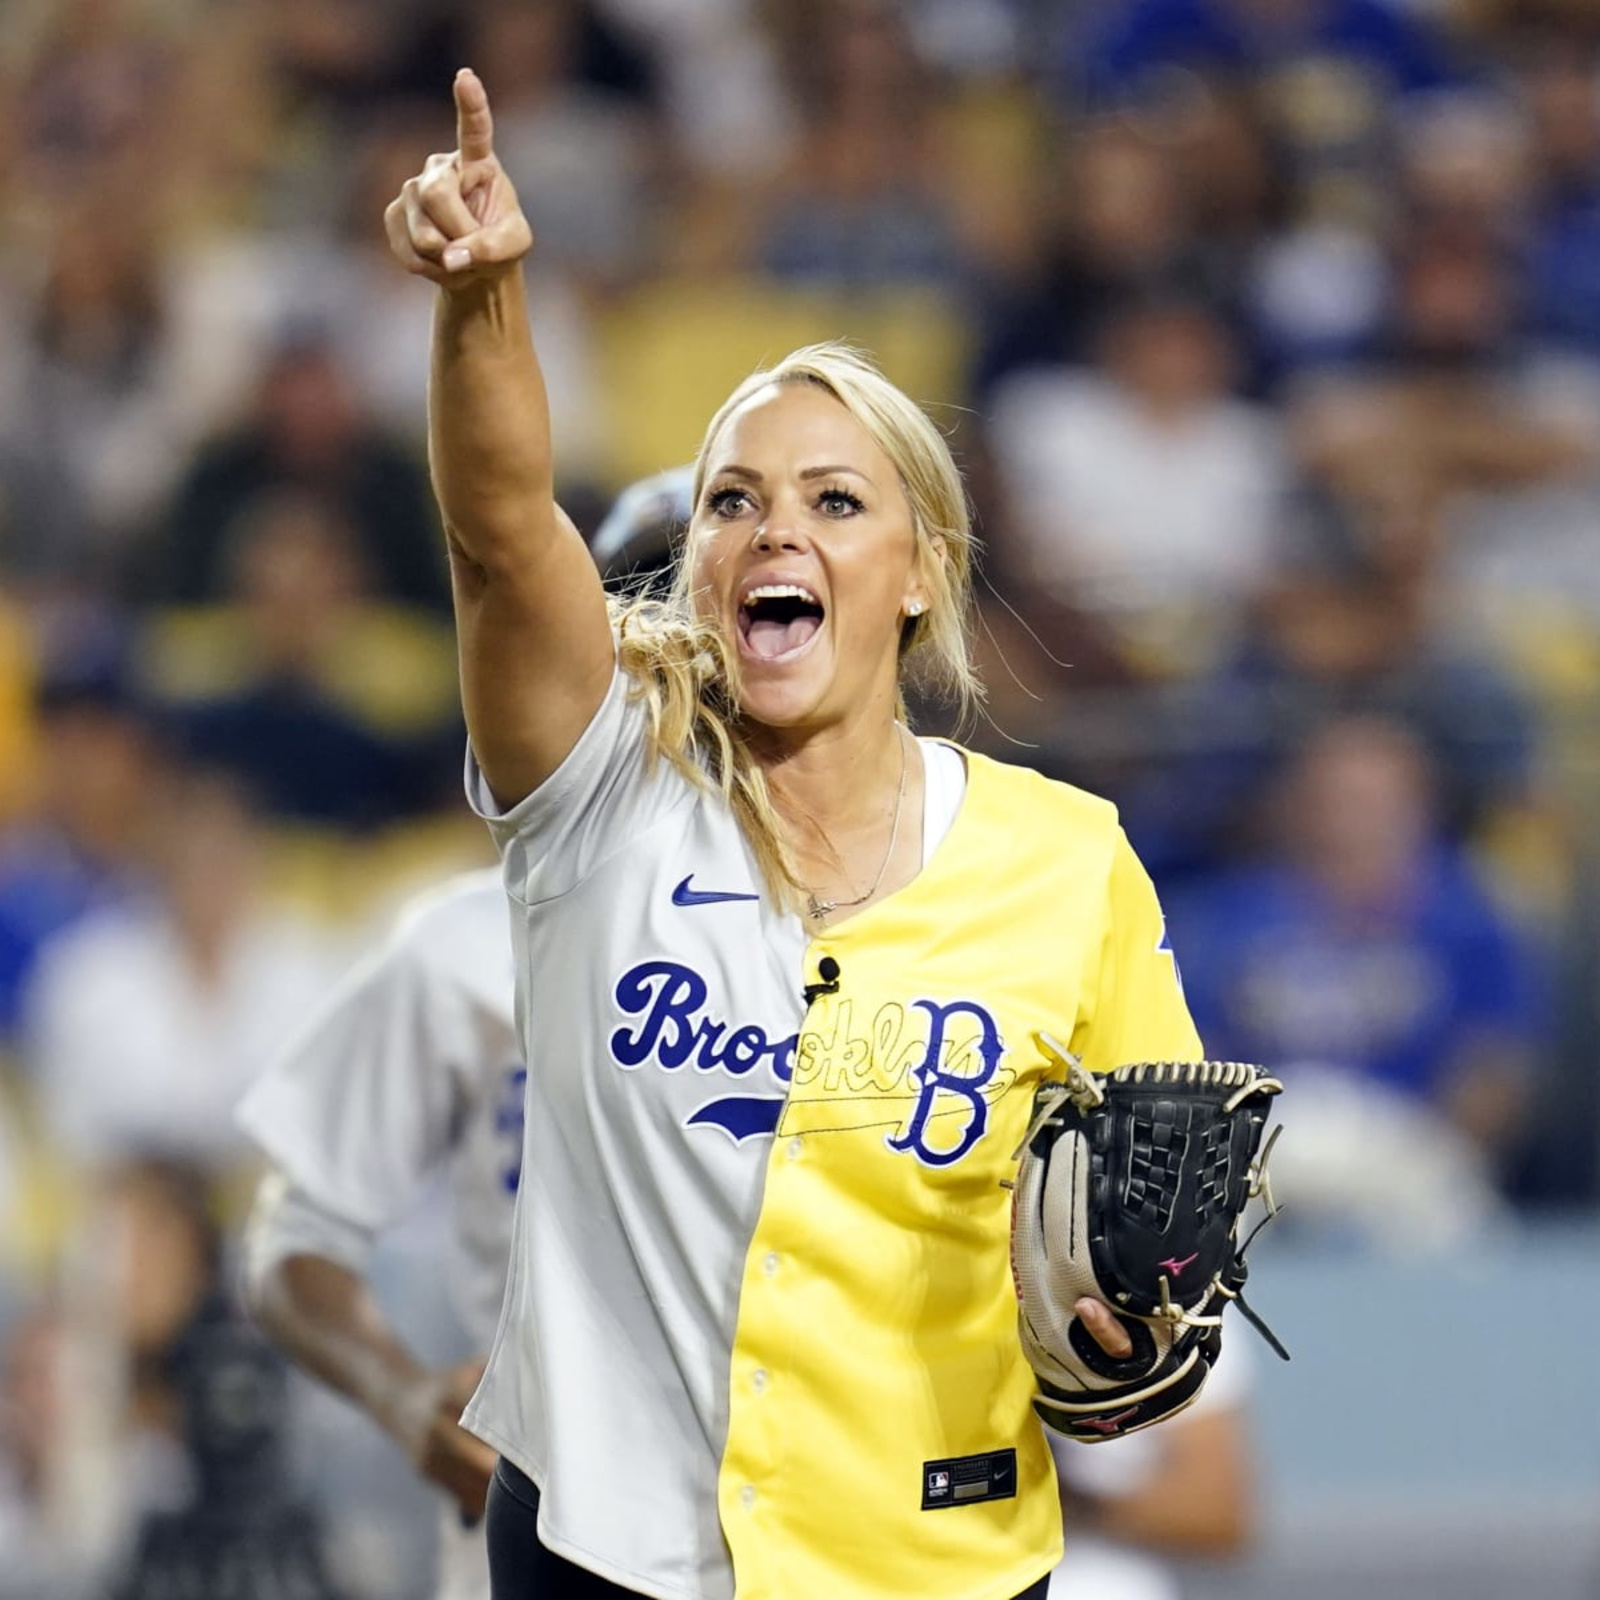 Dodgers: Who is Playing in the Celebrity All-Star Softball Game?